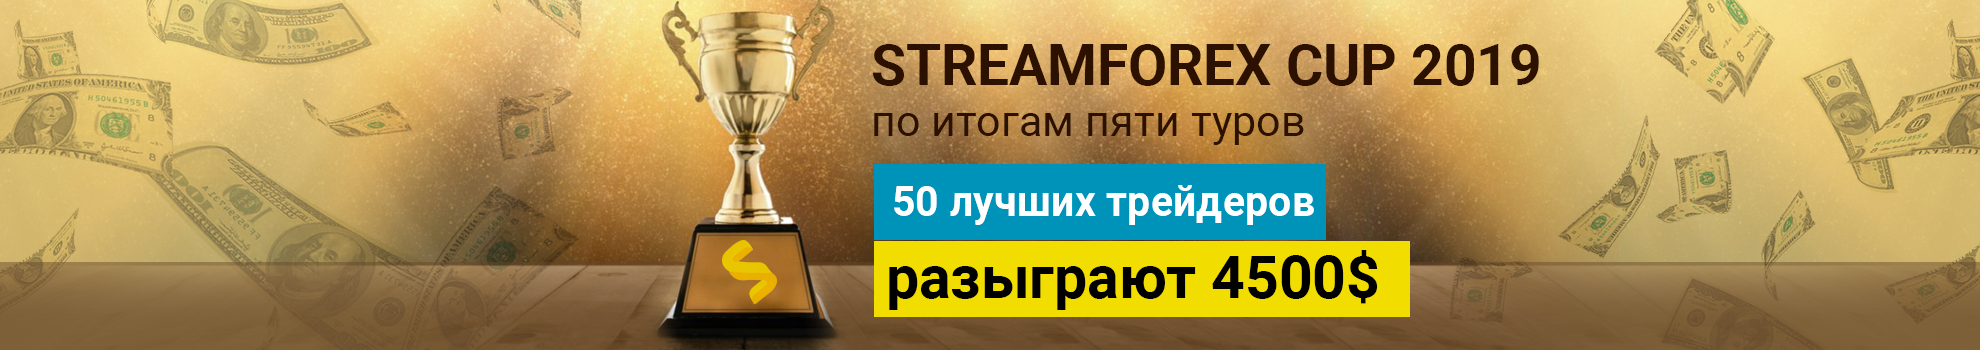 Streamforex Contest: Cup 2019